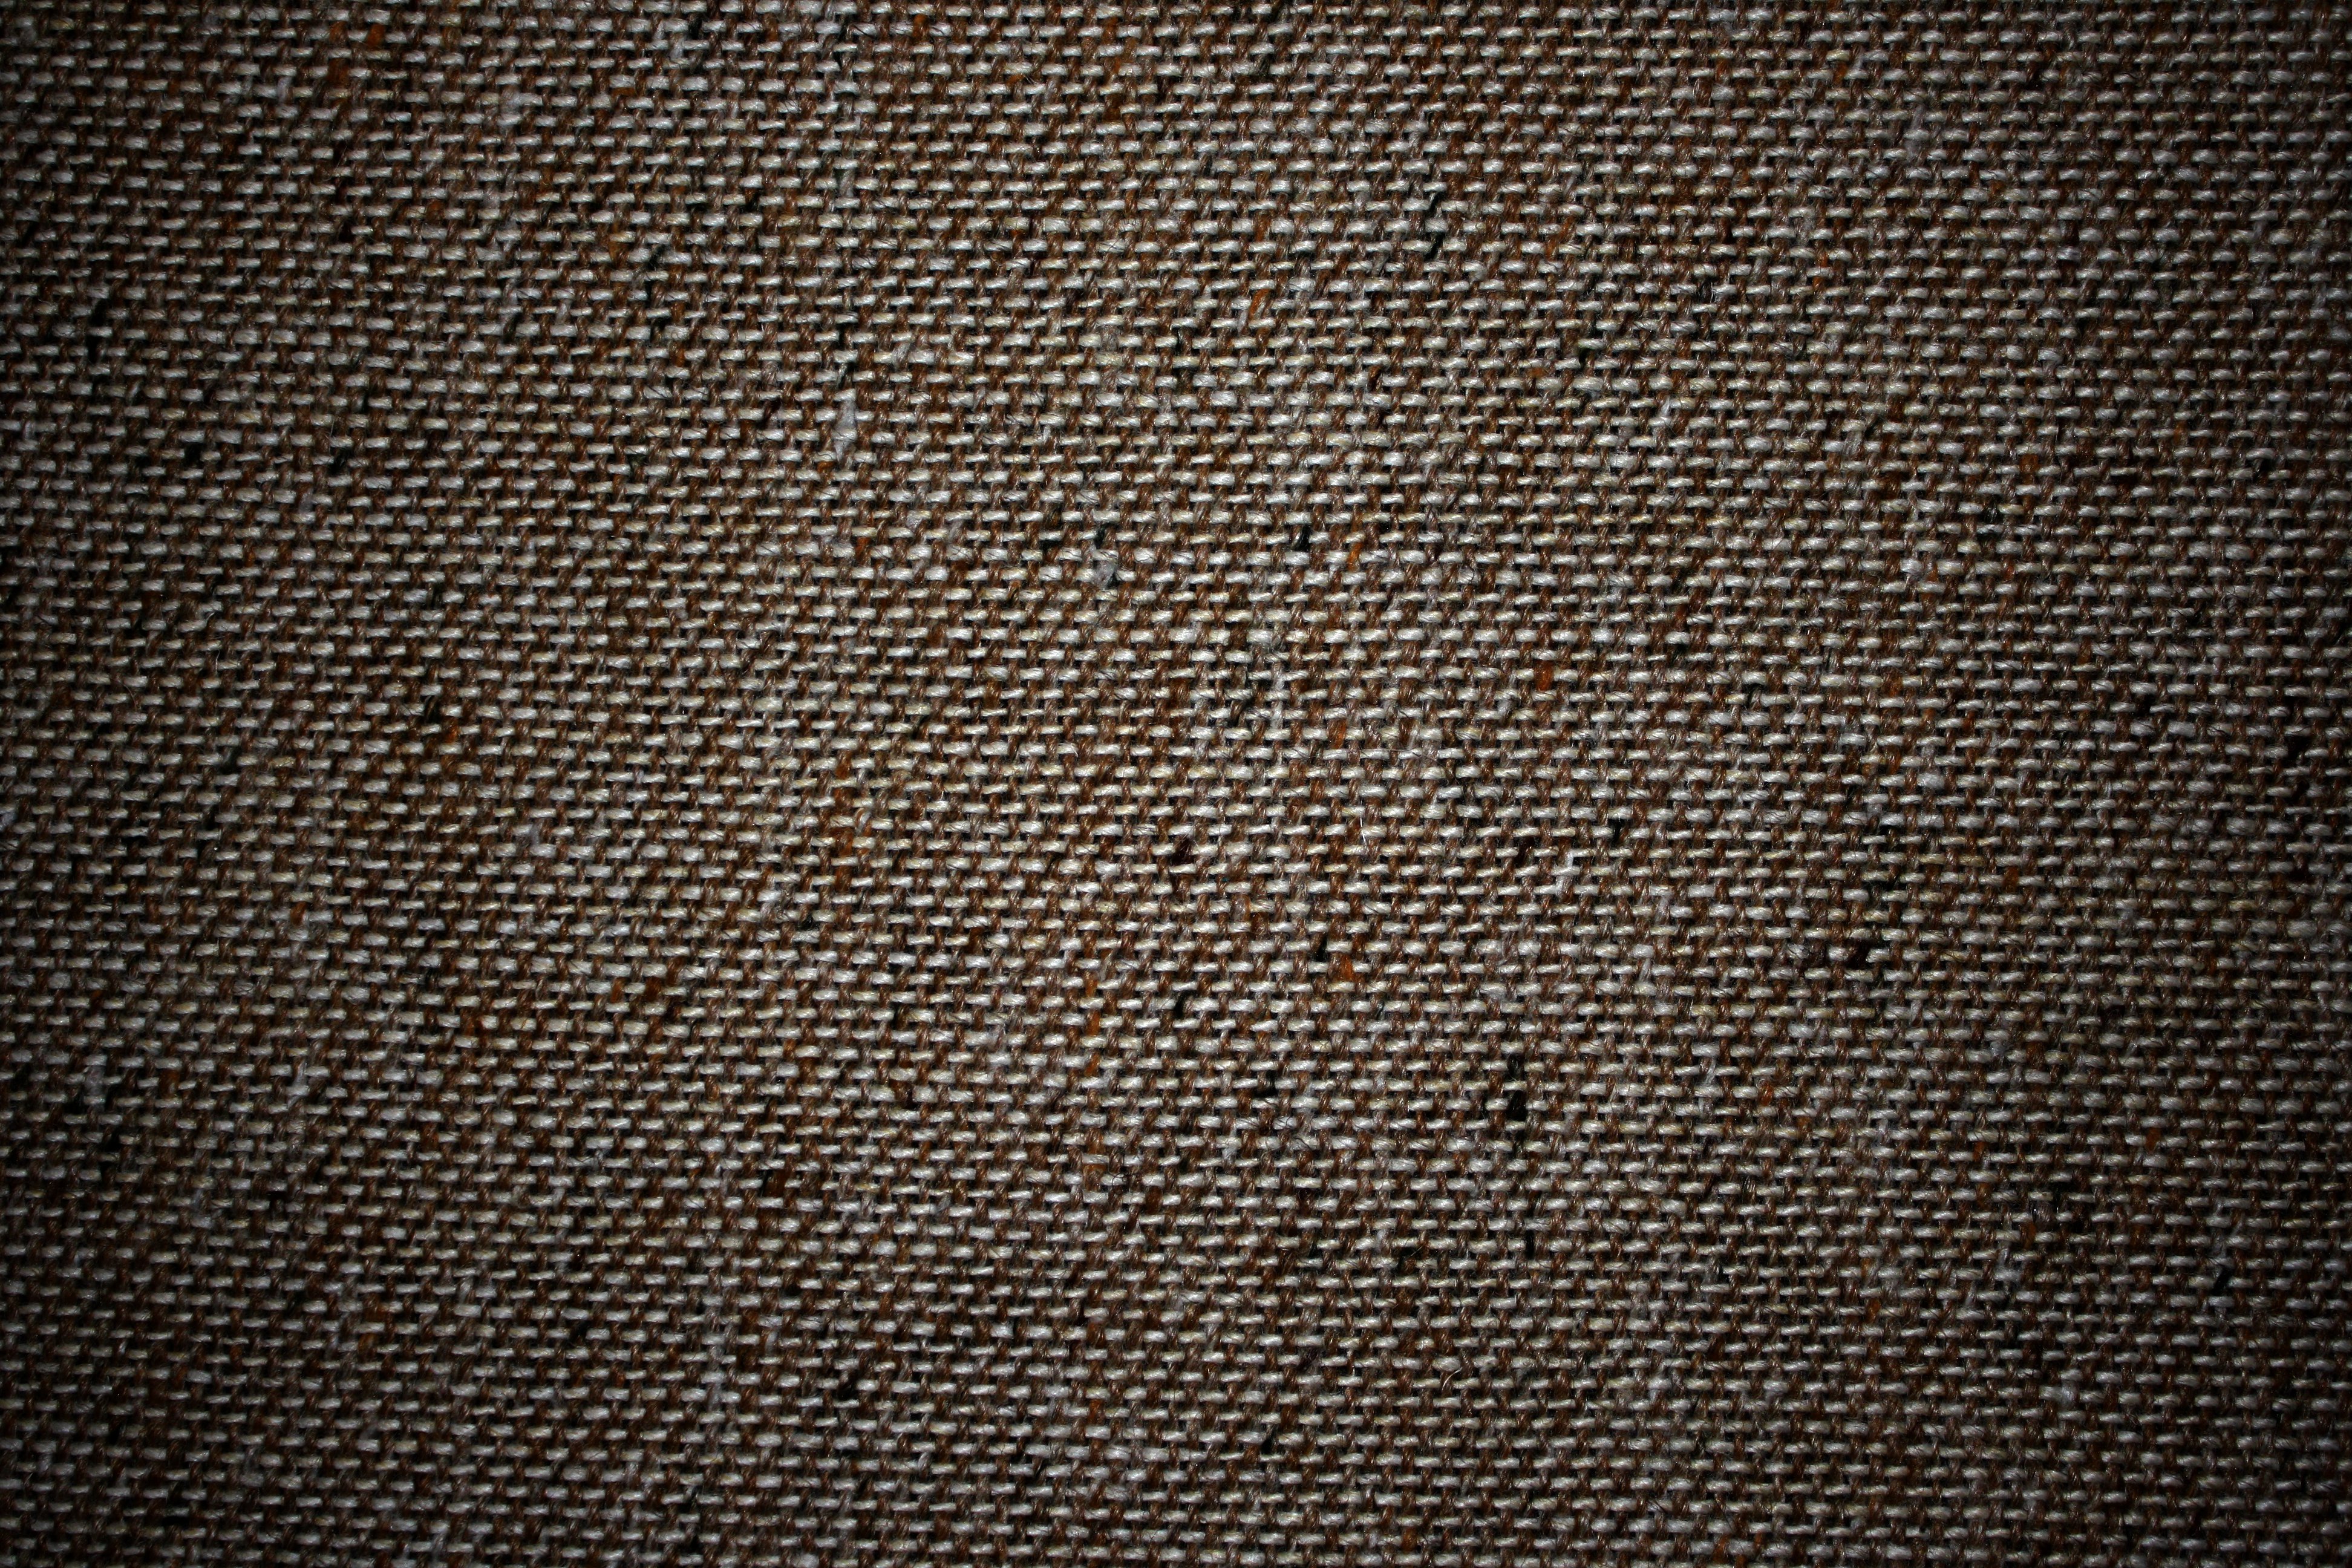 Dark Brown Upholstery Fabric Close Up Texture High Resolution